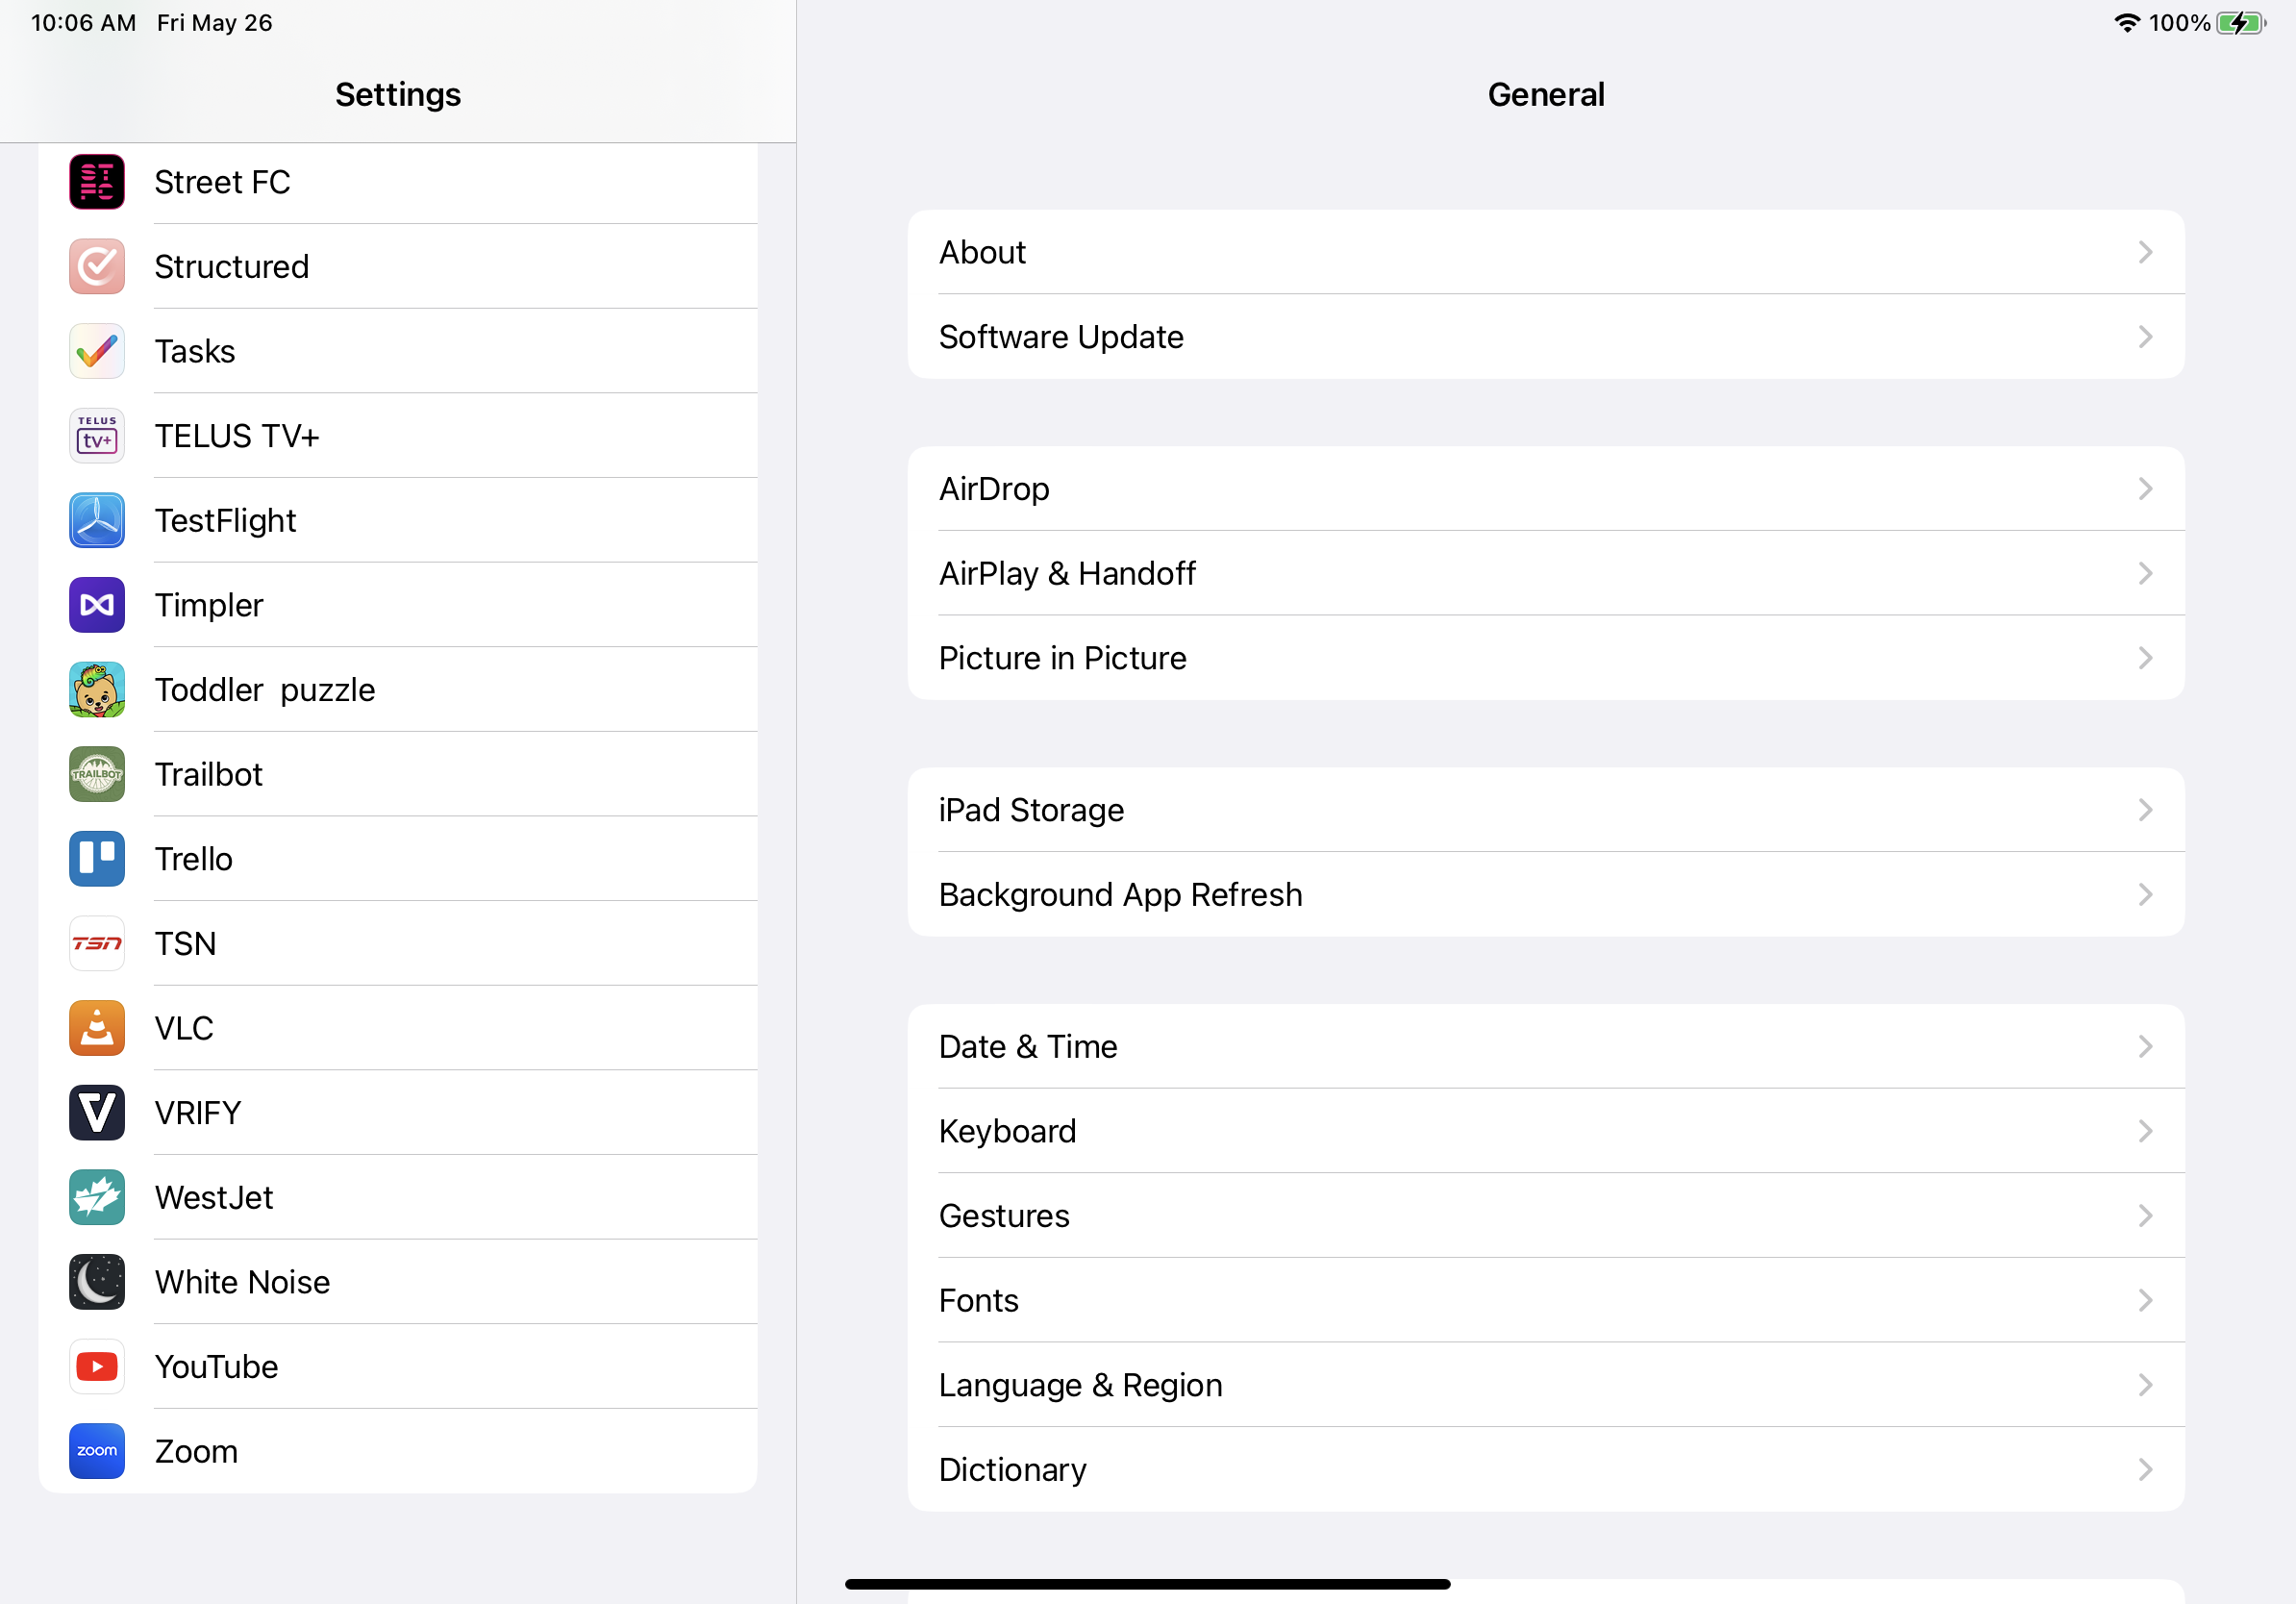 How to enable local network on an iPad